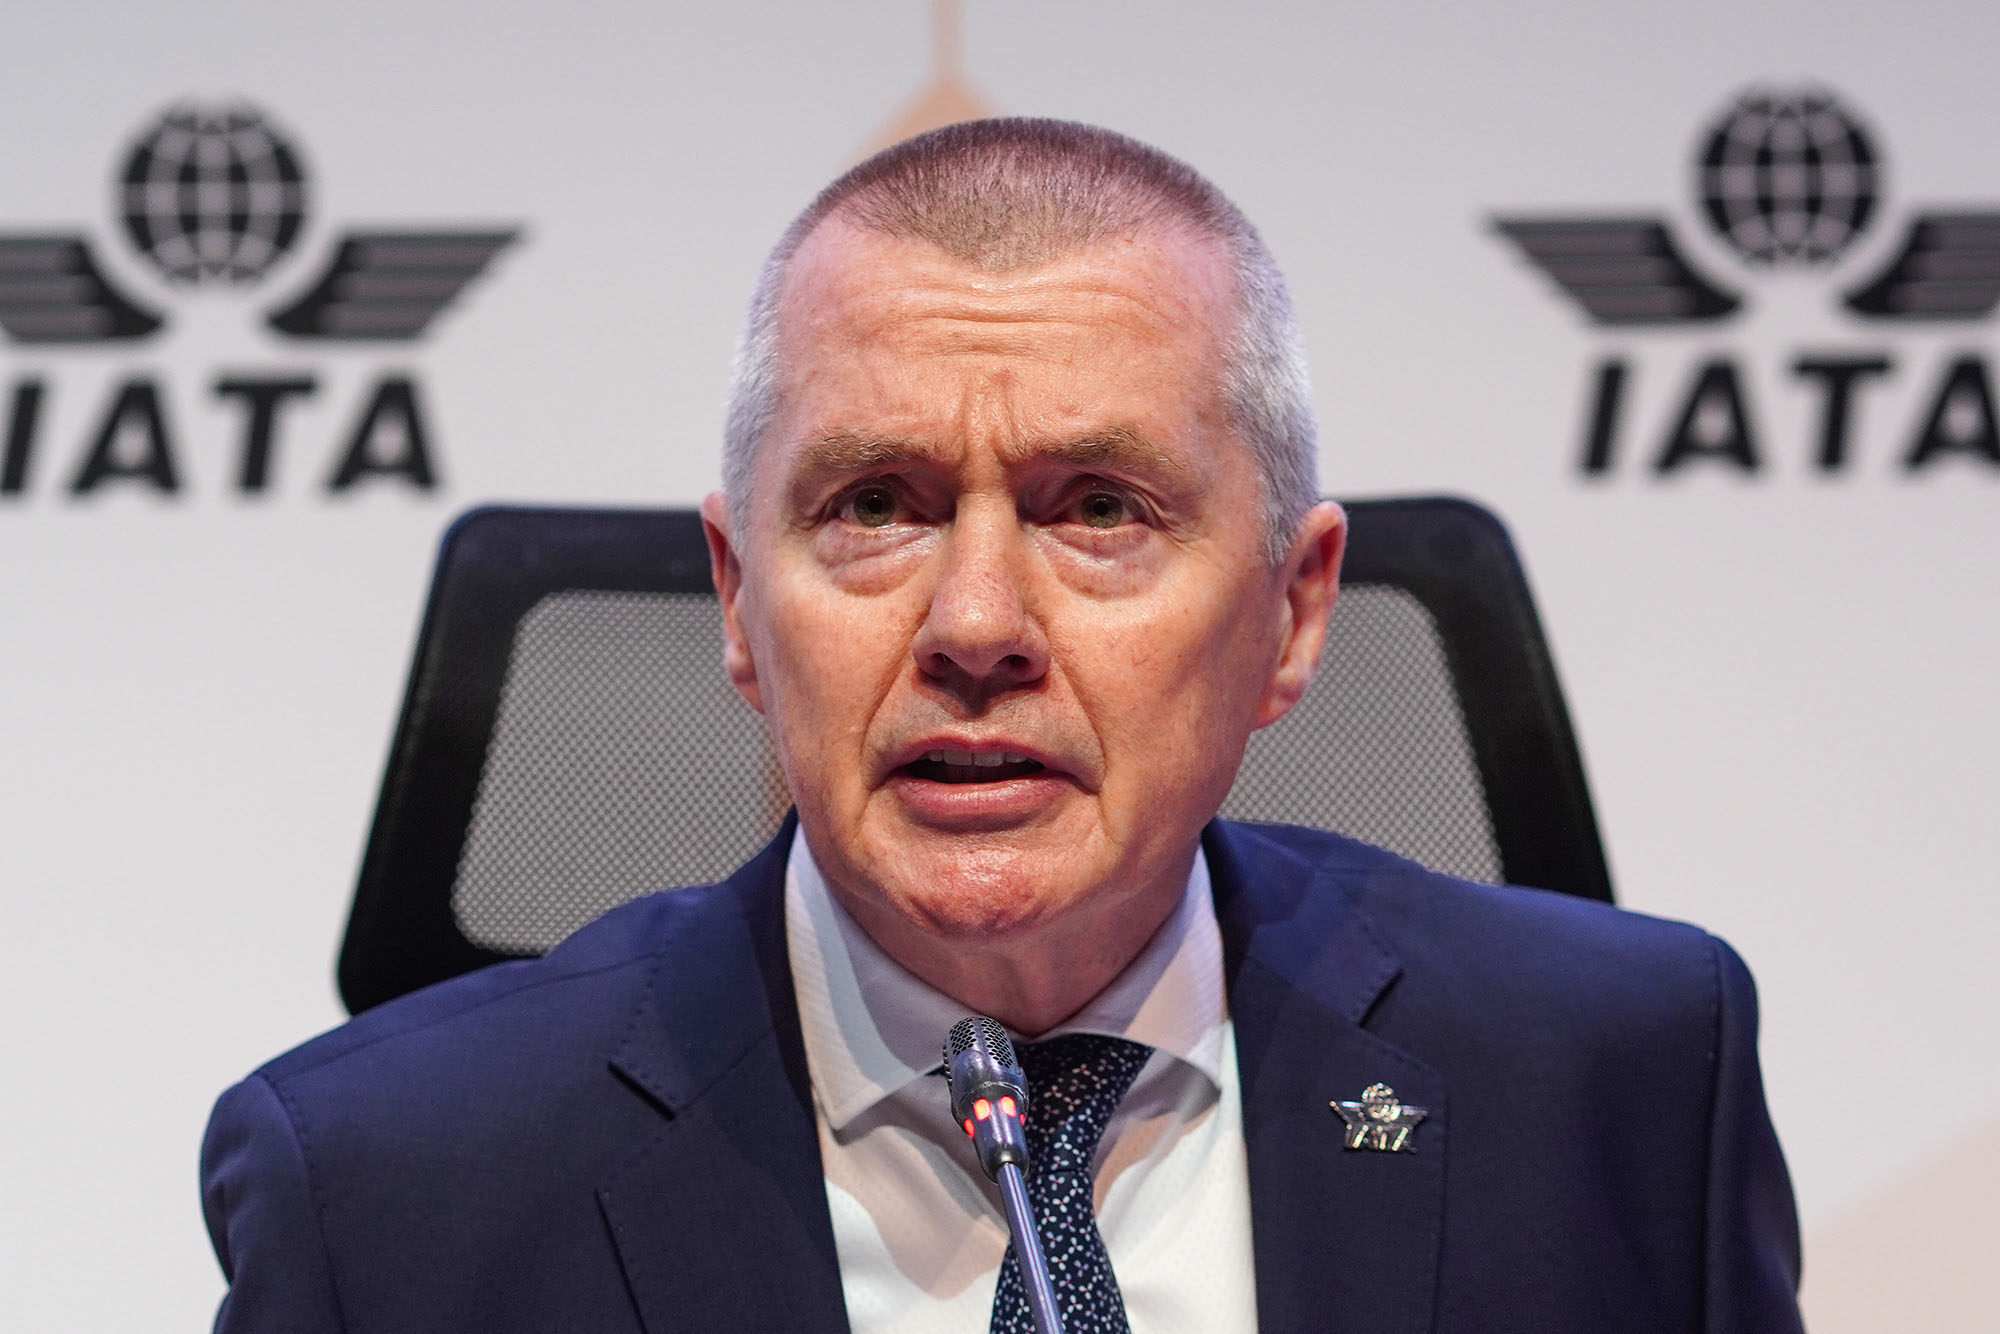 Willie Walsh, director general of the International Air Transport Association, speaks during the International Air Transport Association (IATA) annual general meeting in Istanbul, Turkey, on June 5.